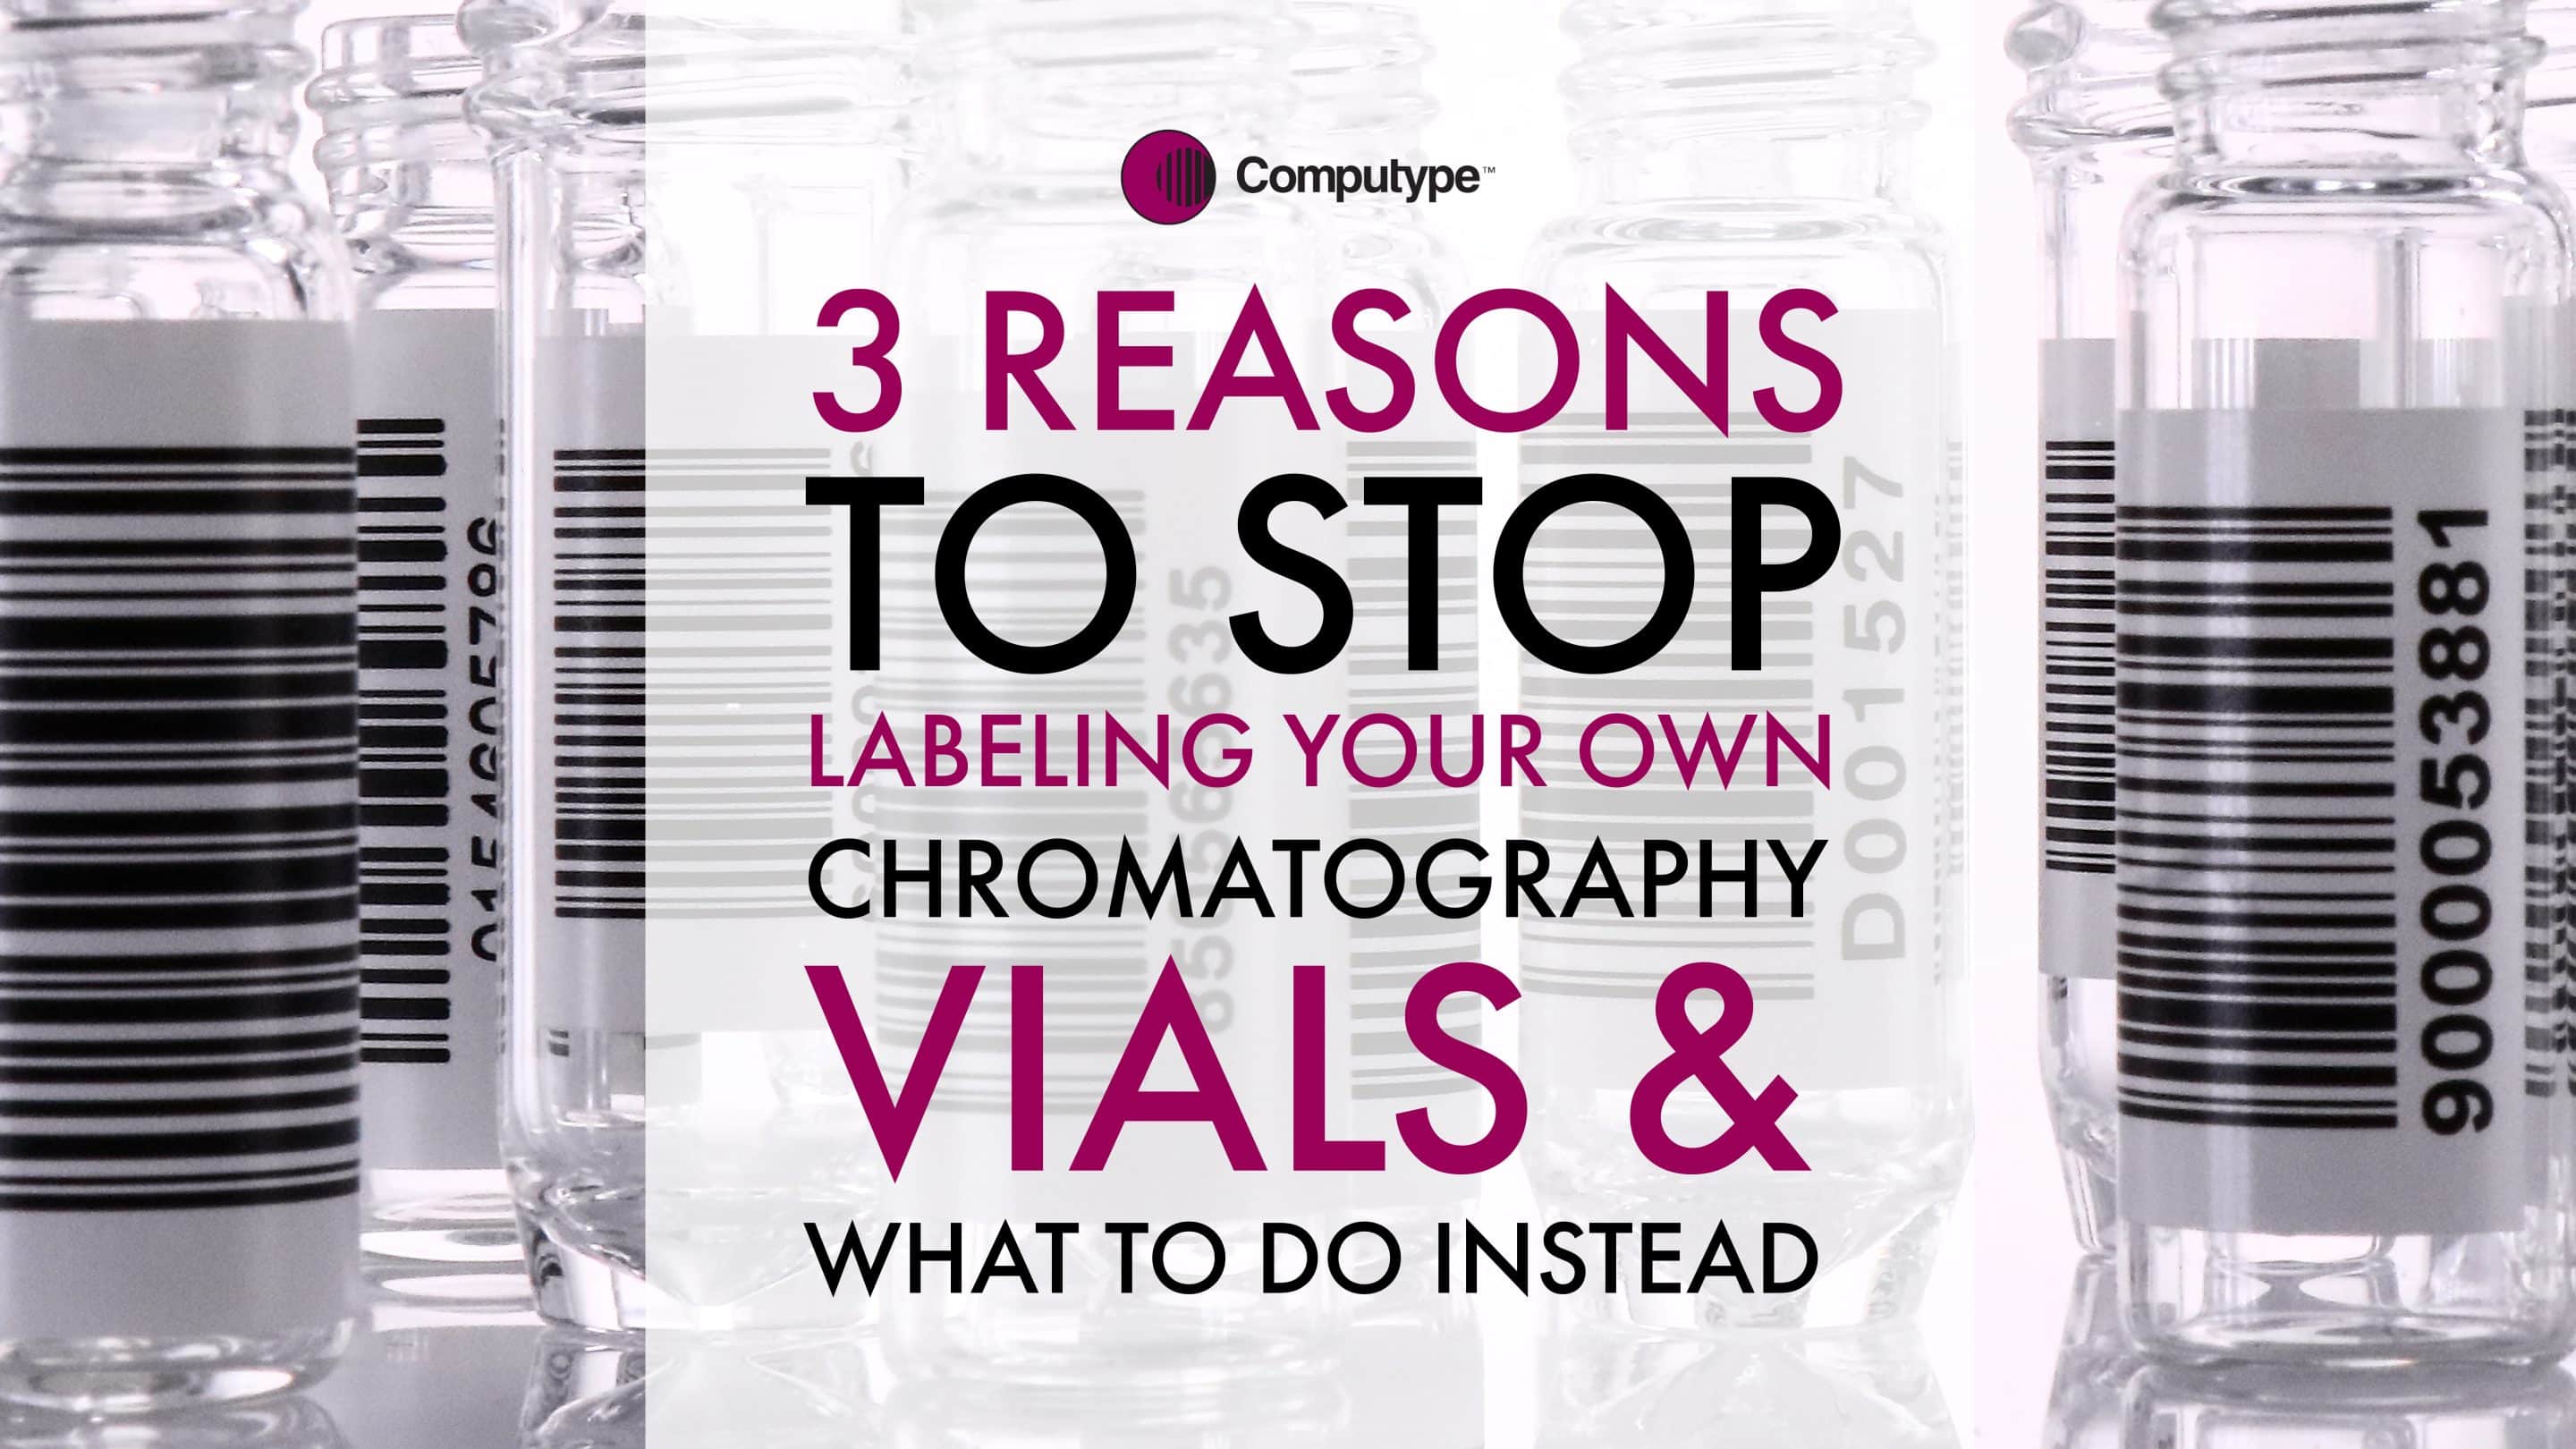 3 Reasons to Stop Labeling Your Own Chromatography Vials & What to do Instead